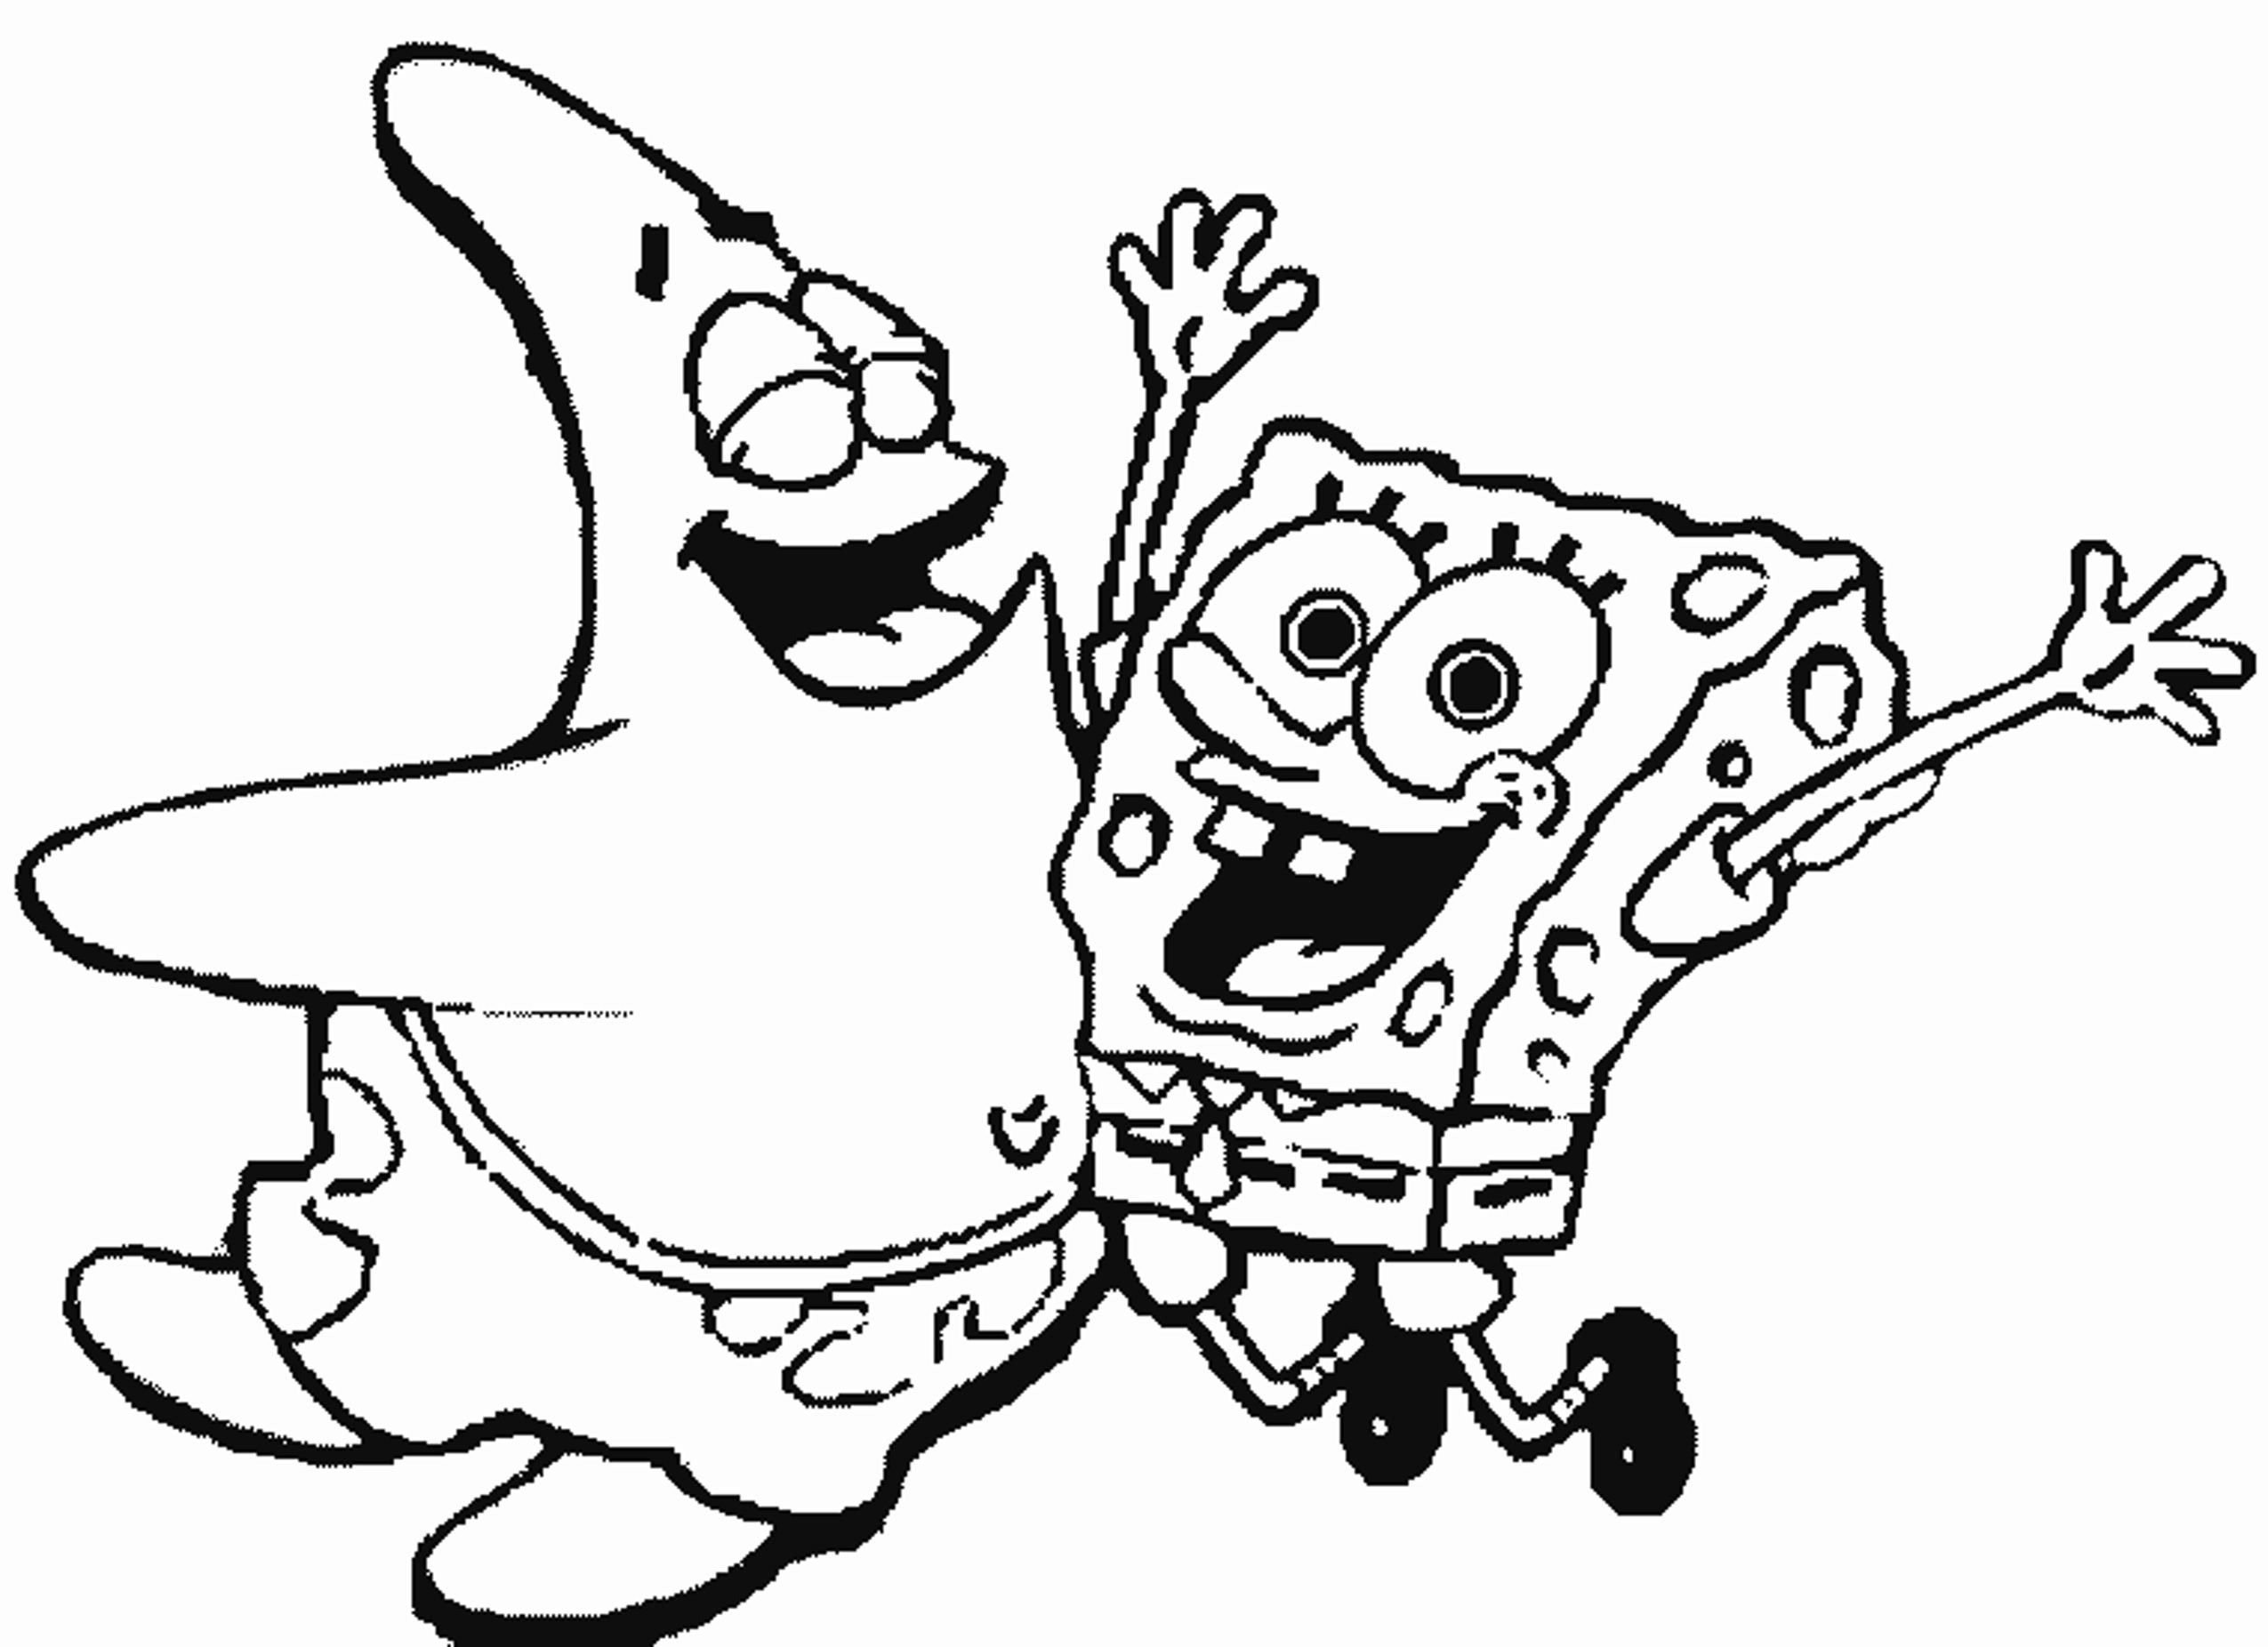 Baby Spongebob And Patrick - Coloring Pages for Kids and for Adults